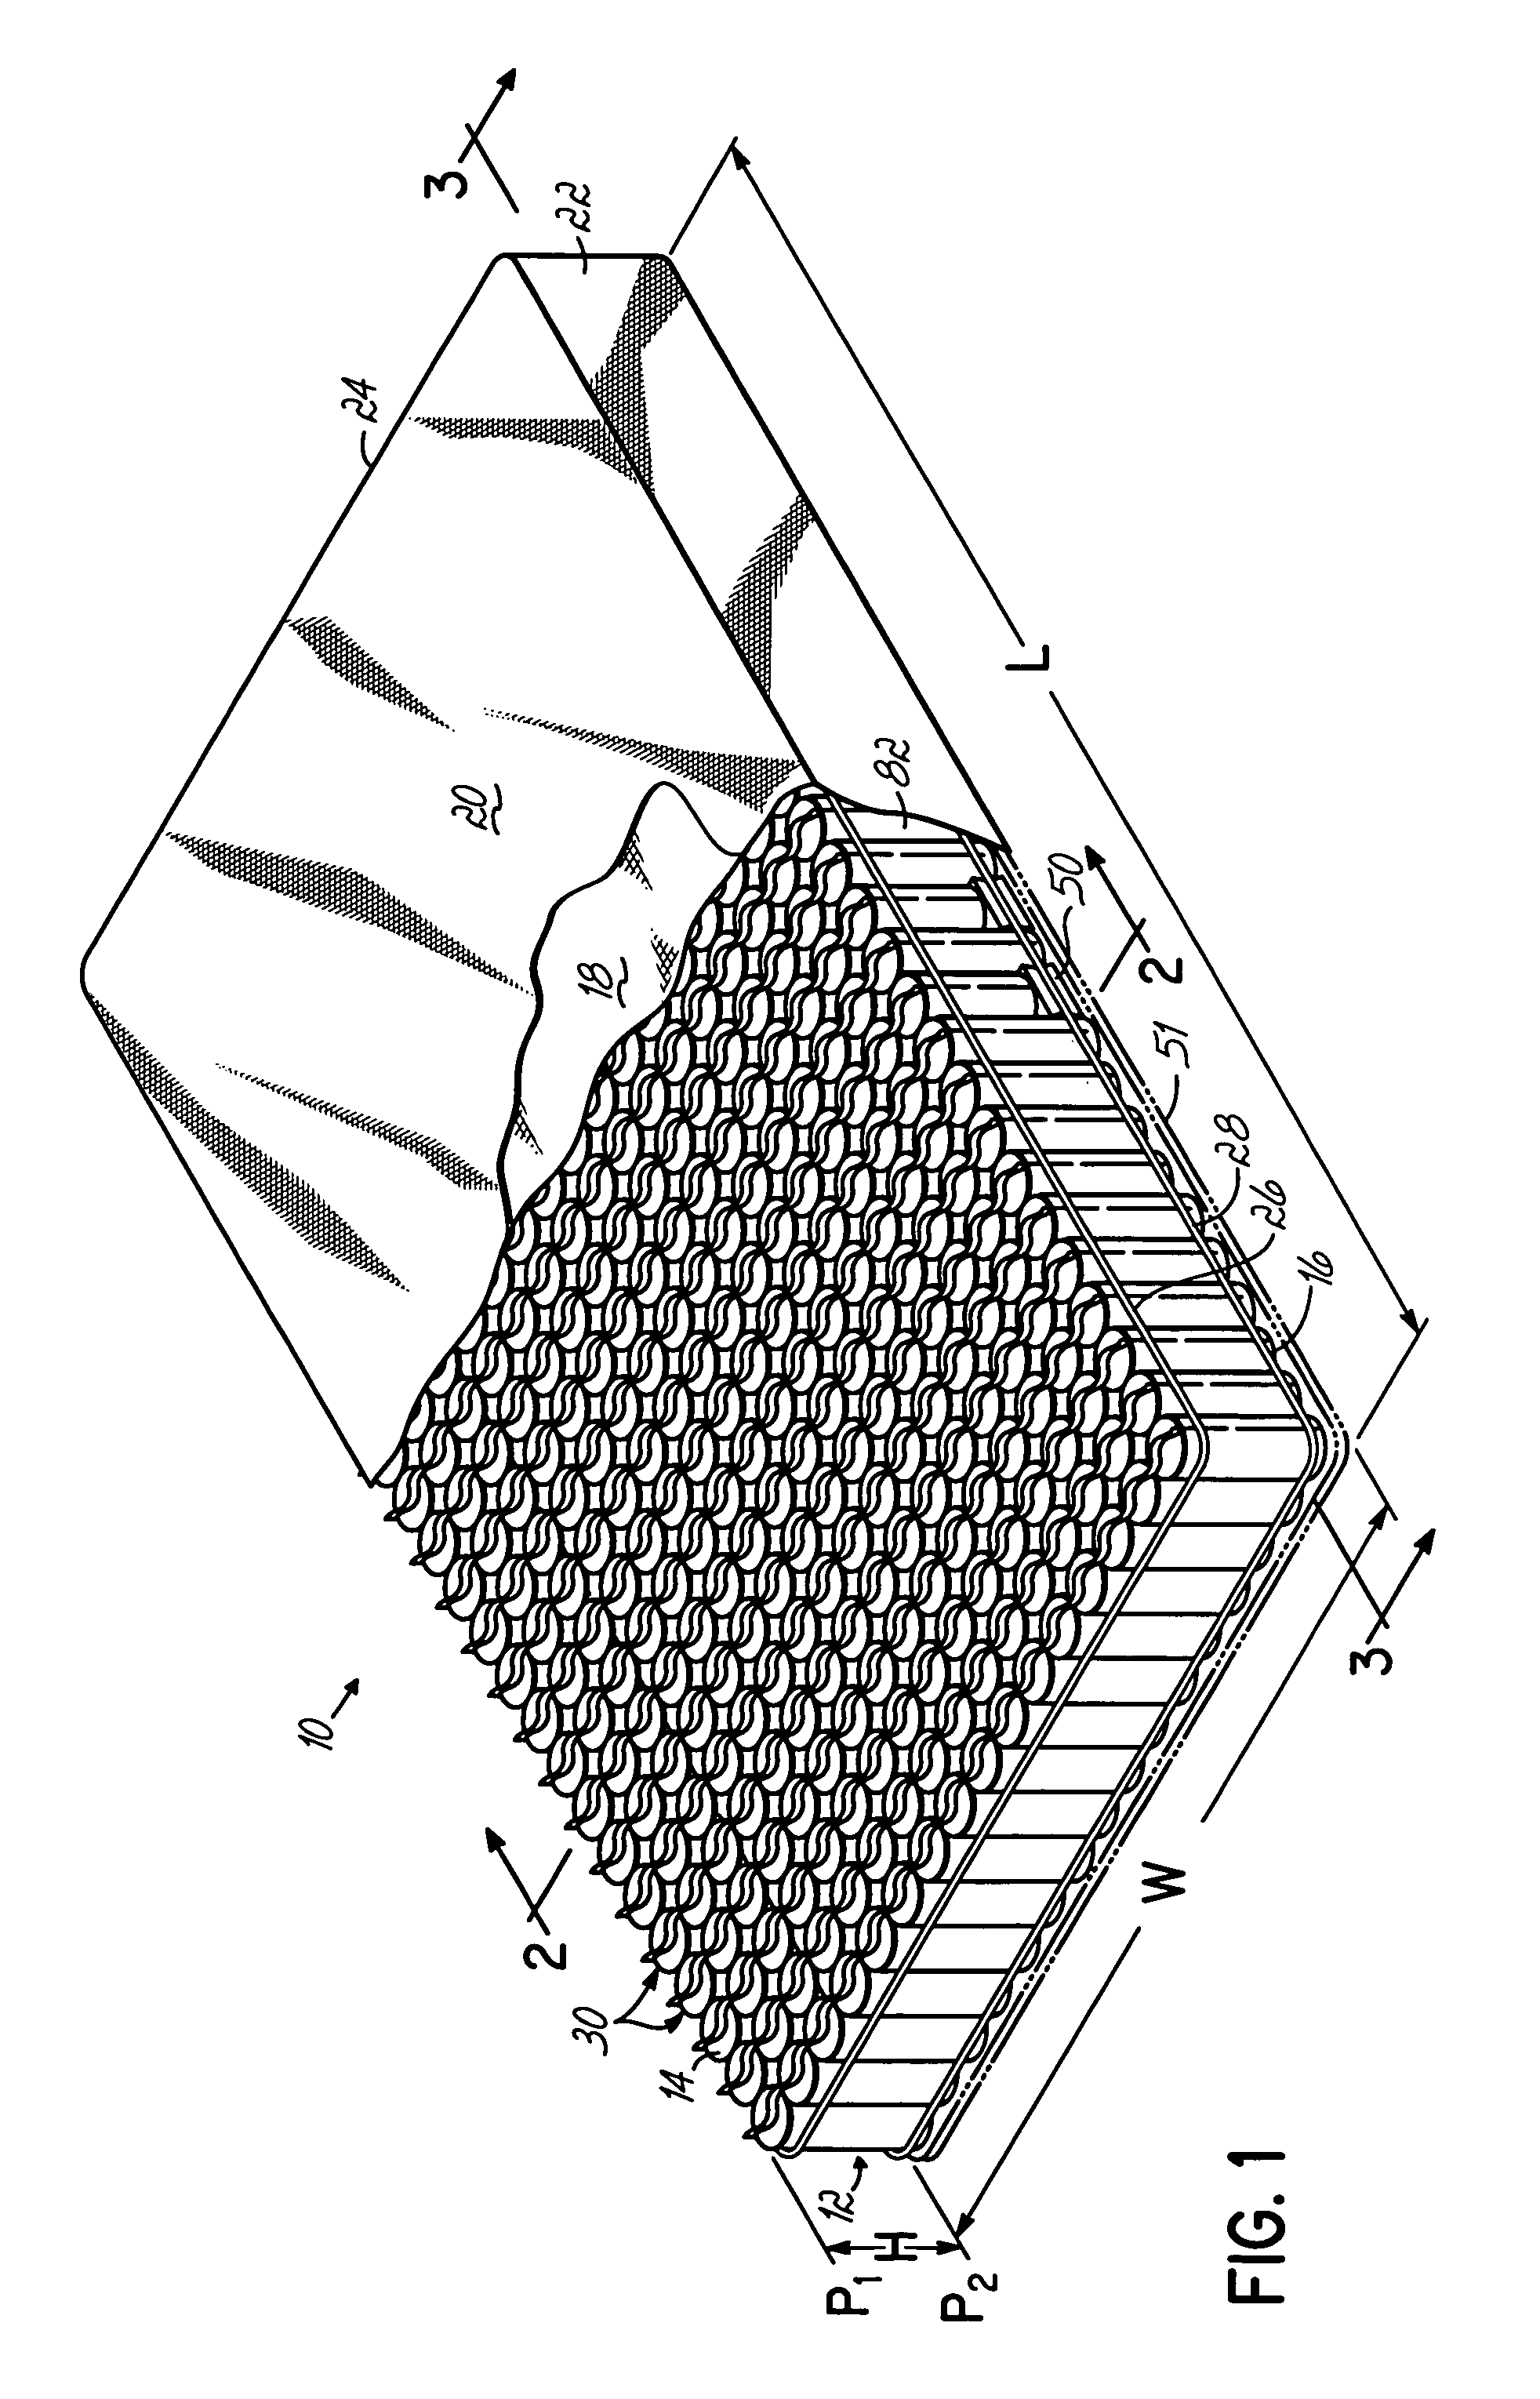 Pocketed bedding or seating product having inflatable members